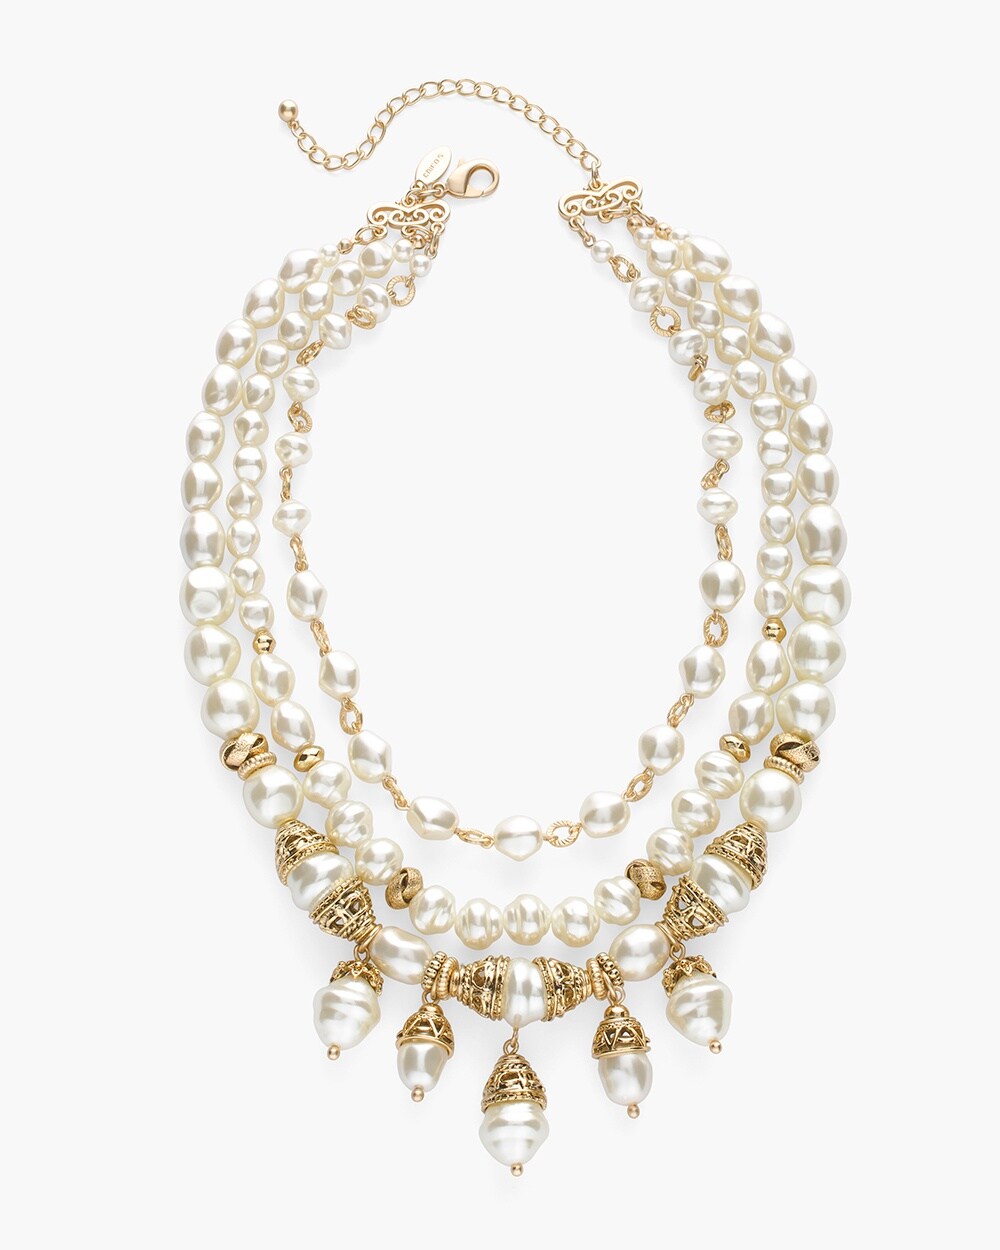 Gold-Tone and Faux-Pearl Multi-Strand Necklace